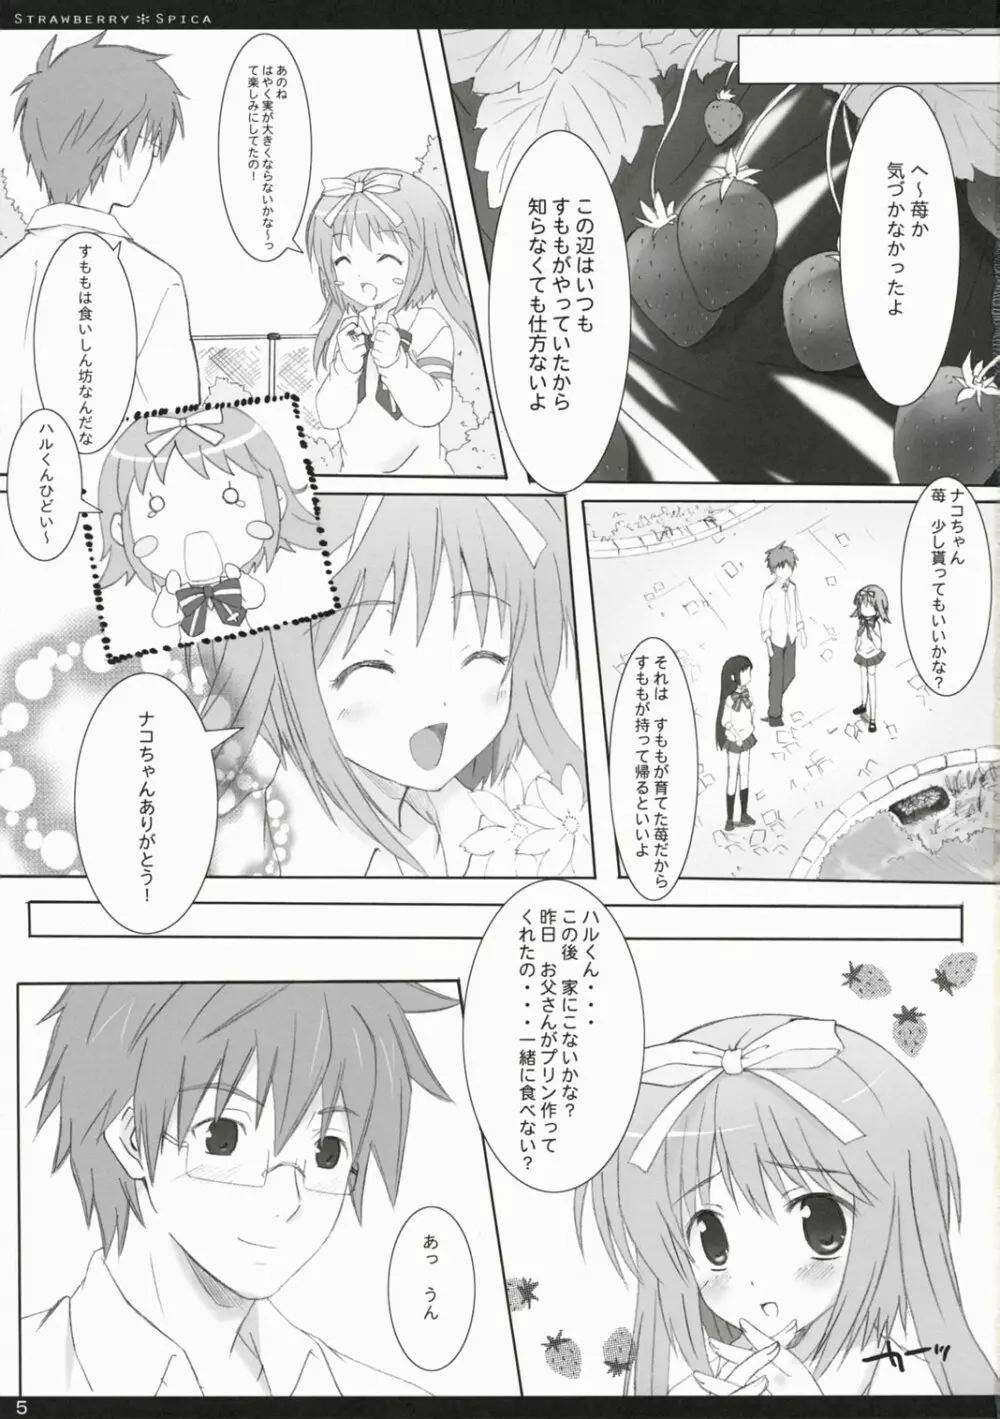 Strawberry Spica Page.4